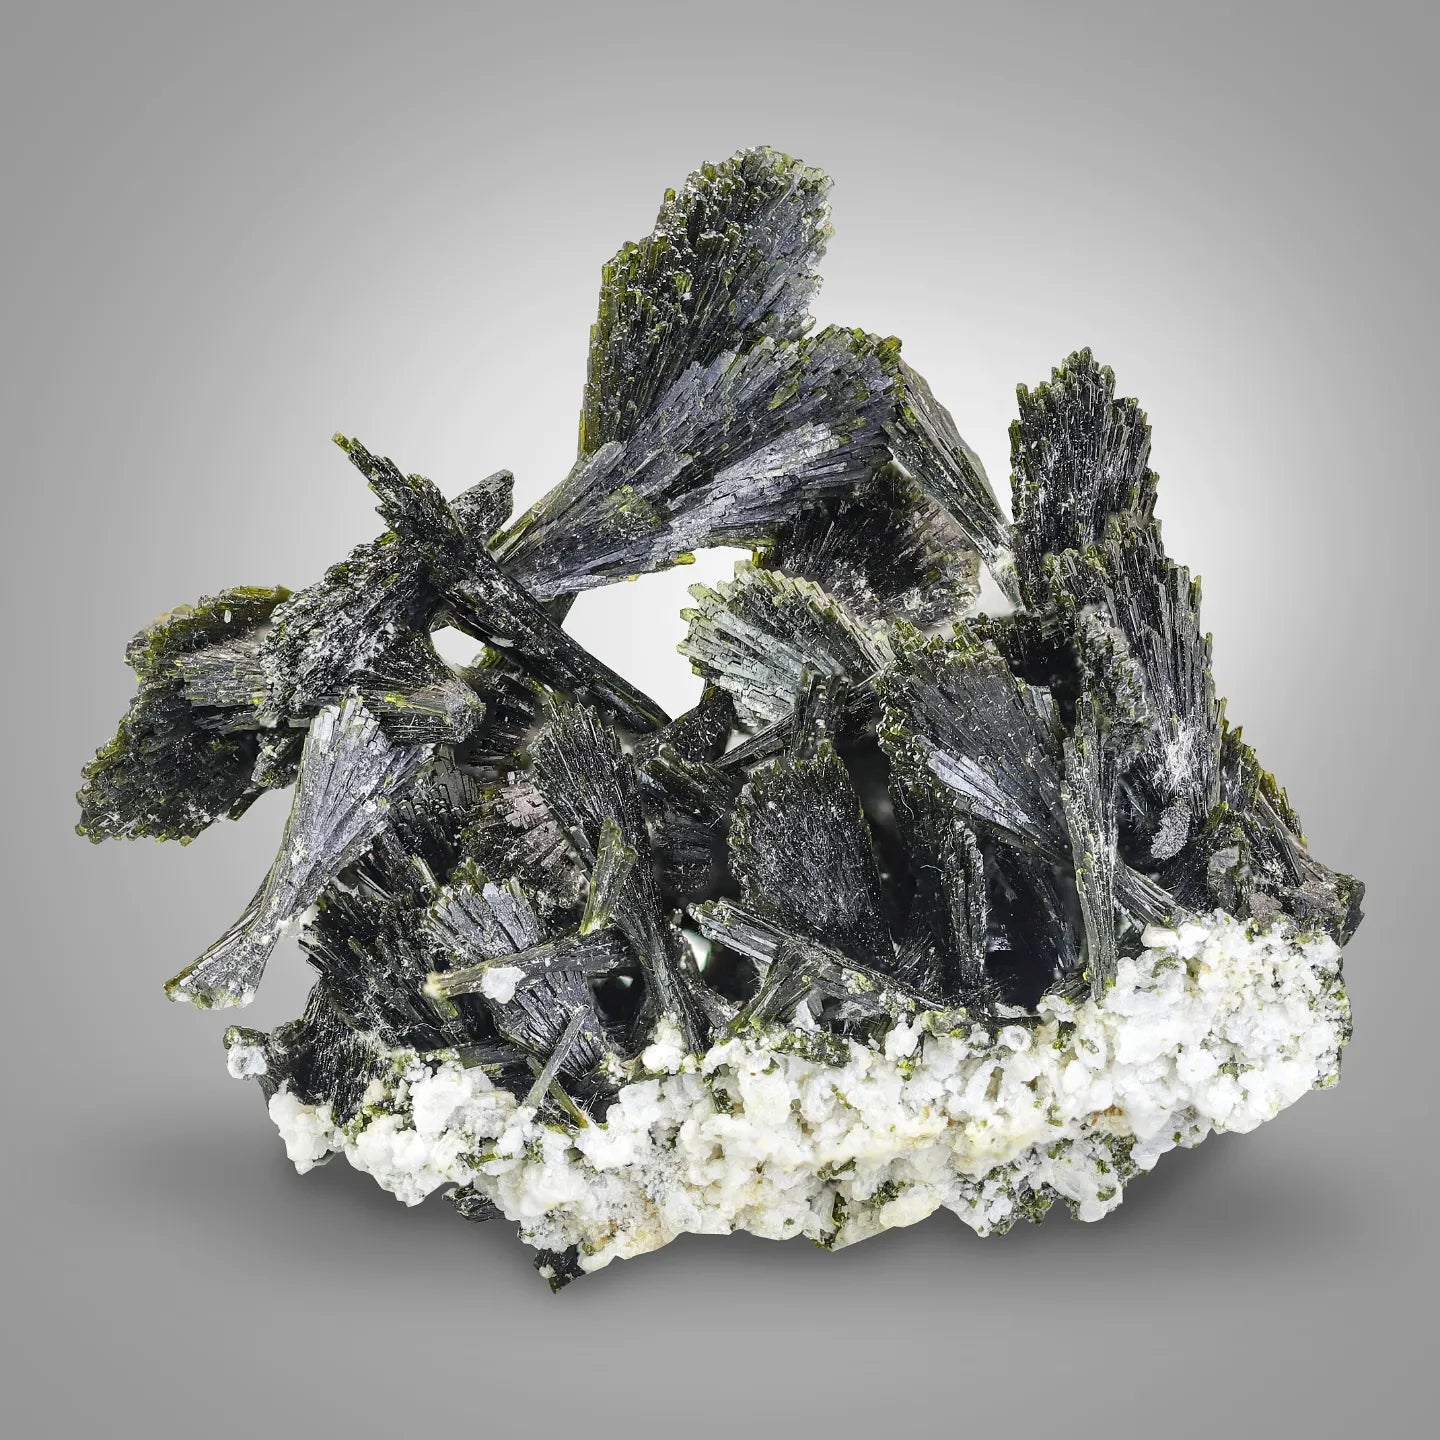 Rare Translucent Forest Green Epidote Crystal on Albite Matrix from Pakistan